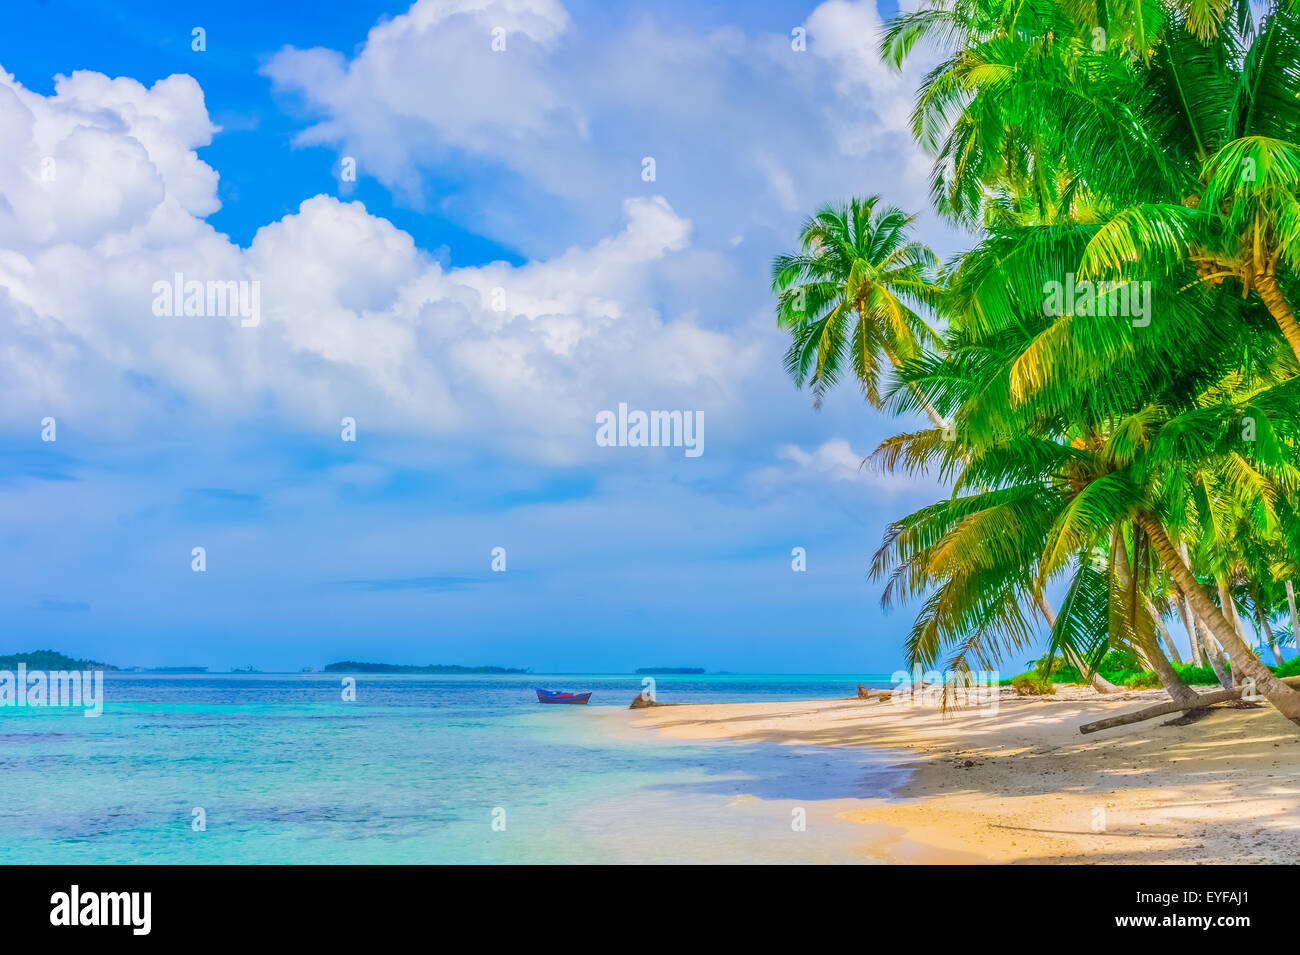 Desert island with palm trees, Indian Ocean, Indonesia Stock Photo